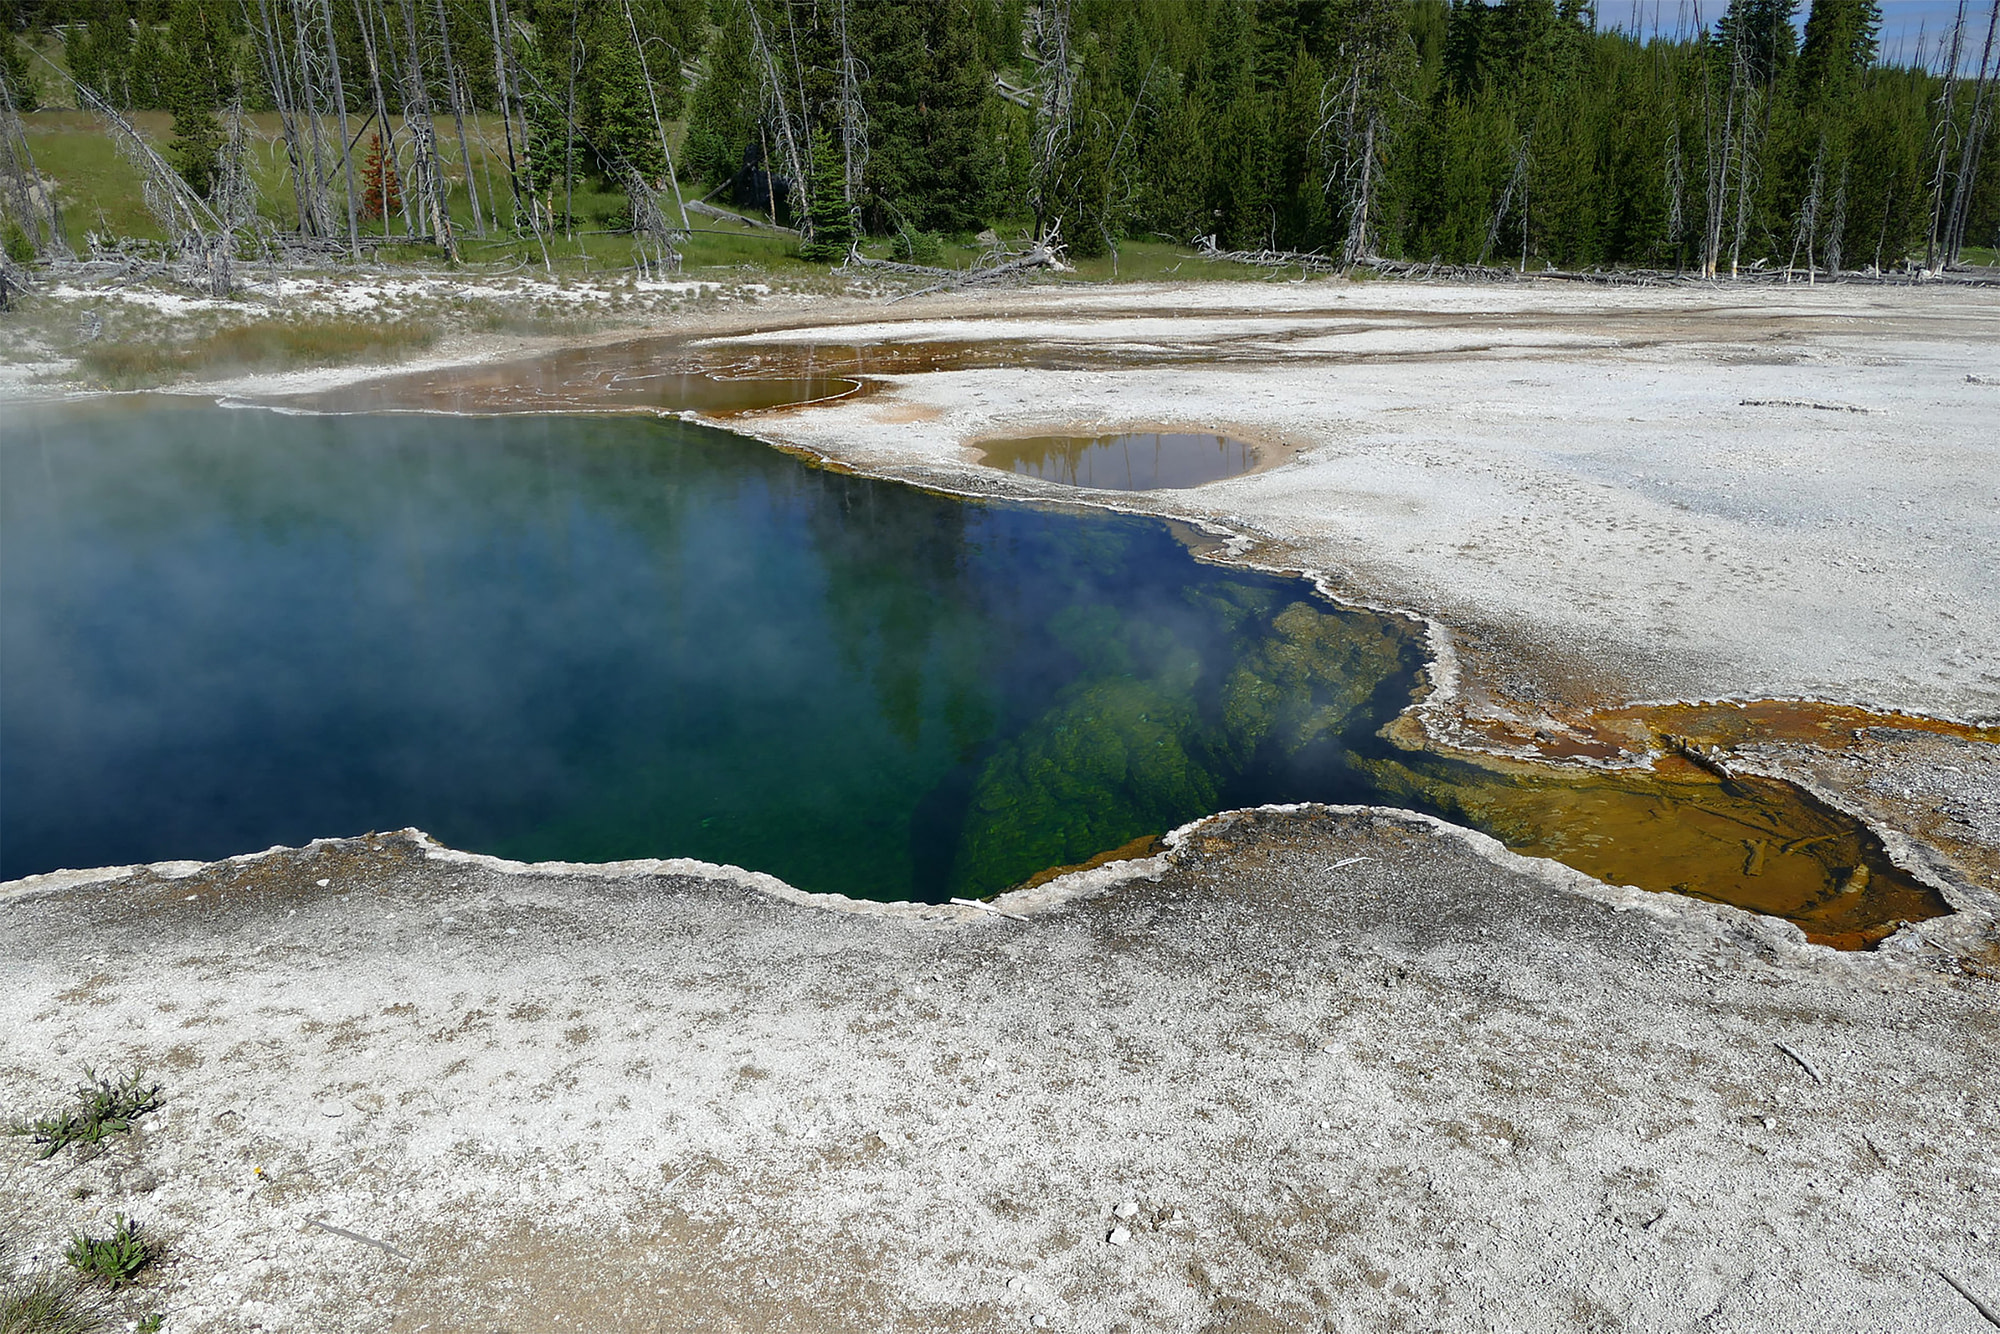 Dead man whose foot was found in Yellowstone hot spring is identified